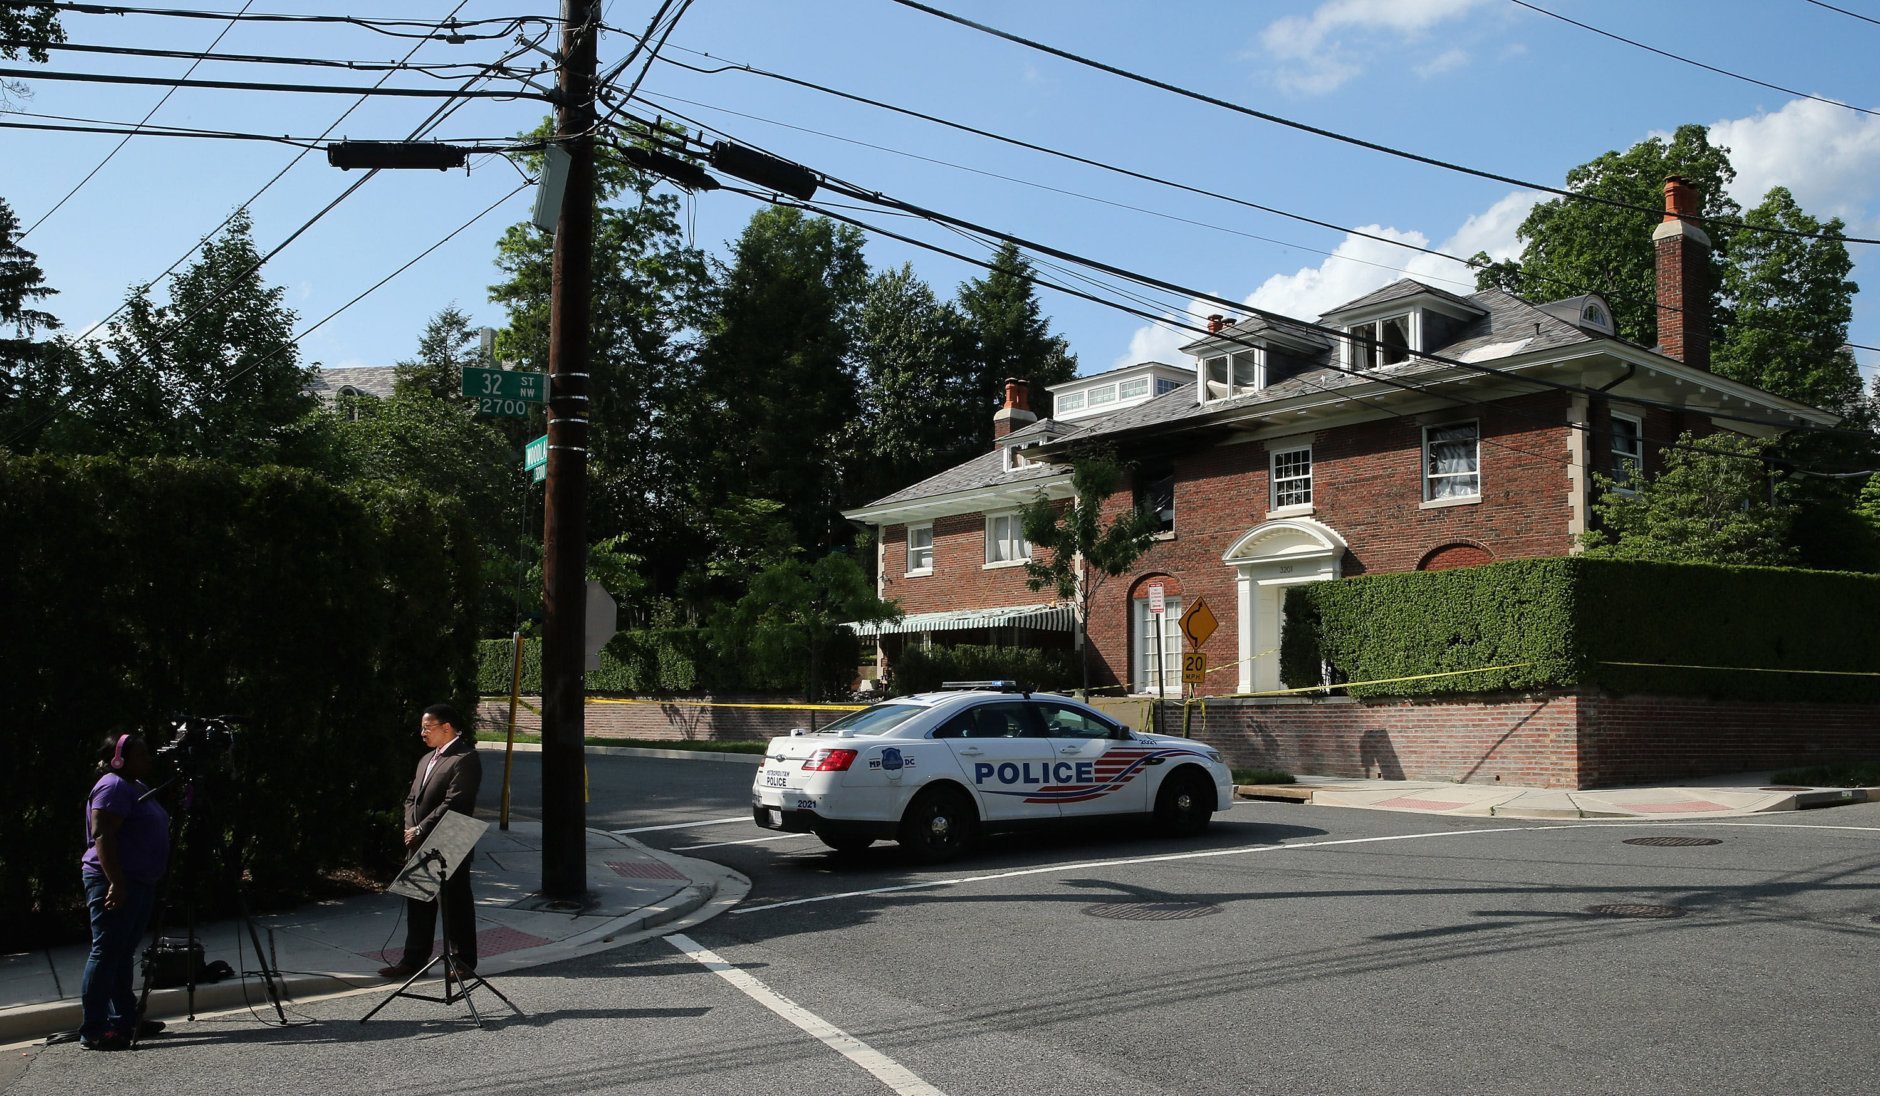 WASHINGTON, DC - MAY 19:  A television reporter waits to go live across the street from a house on the 3200 block of Woodland Drive NW May 19, 2015 in Washington, DC. Firefighters discovered the bodies of Savvas Savopoulos, 46, his wife Amy, 47, their 10-year-old son Philip, and the housekeeper, Veralicia Figueroa, 57, last Thursday afternoon when they responded to a blaze at the house. Two Savopoulos daughters were away in boarding school at the time. Investigators have ruled the deaths homicides and say they could continue to collect evidence at the house for another week.  (Photo by Chip Somodevilla/Getty Images)